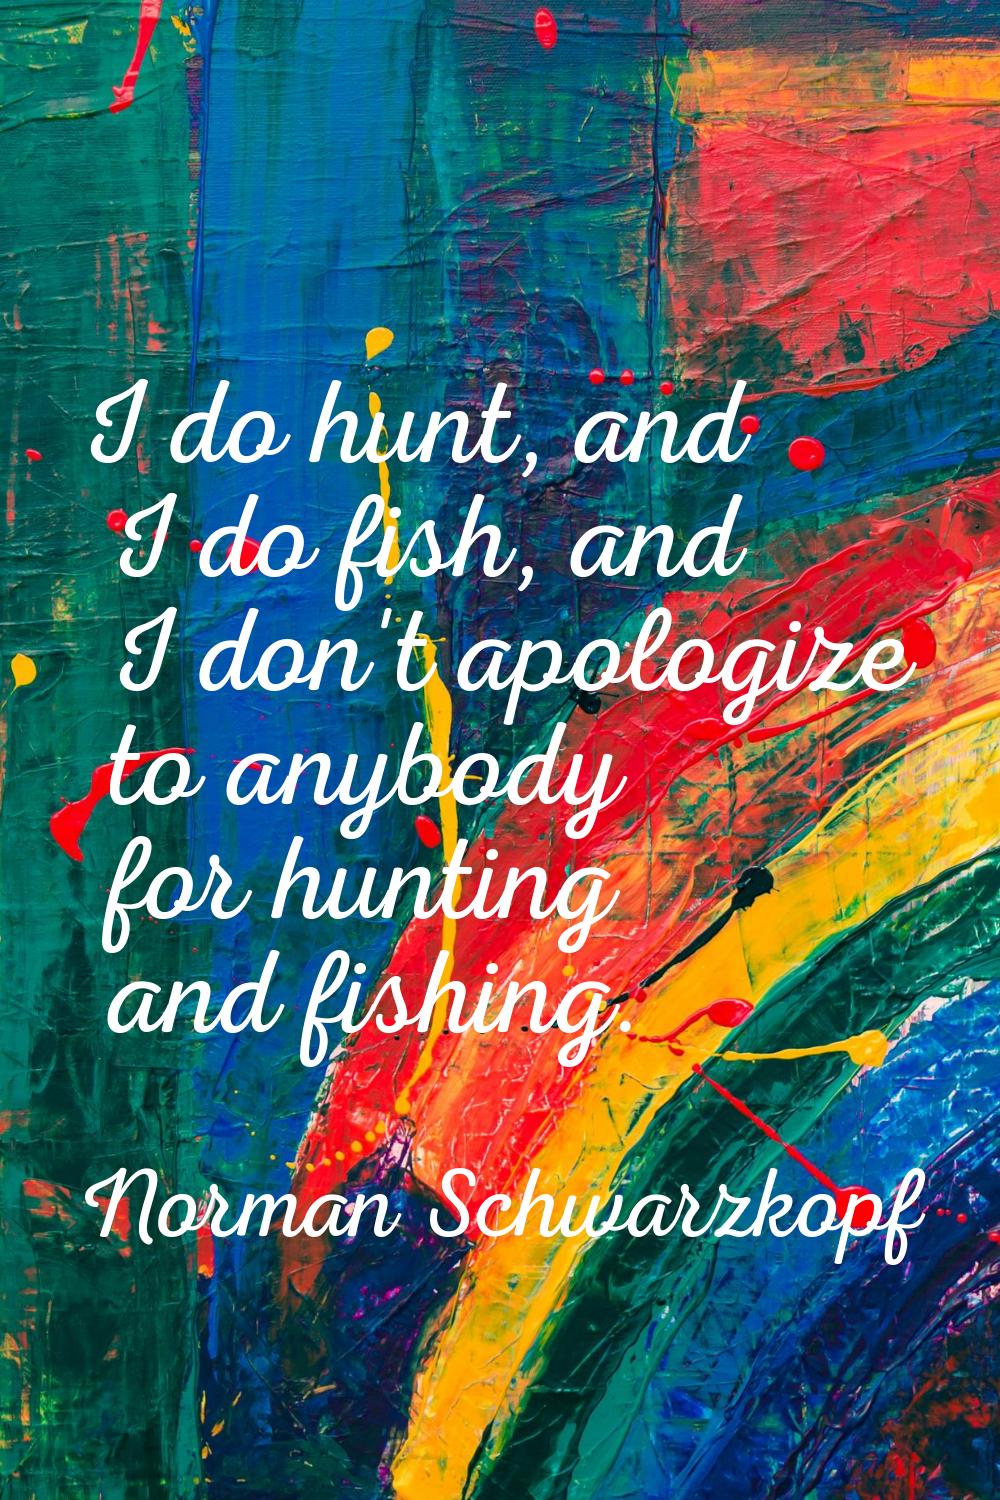 I do hunt, and I do fish, and I don't apologize to anybody for hunting and fishing.